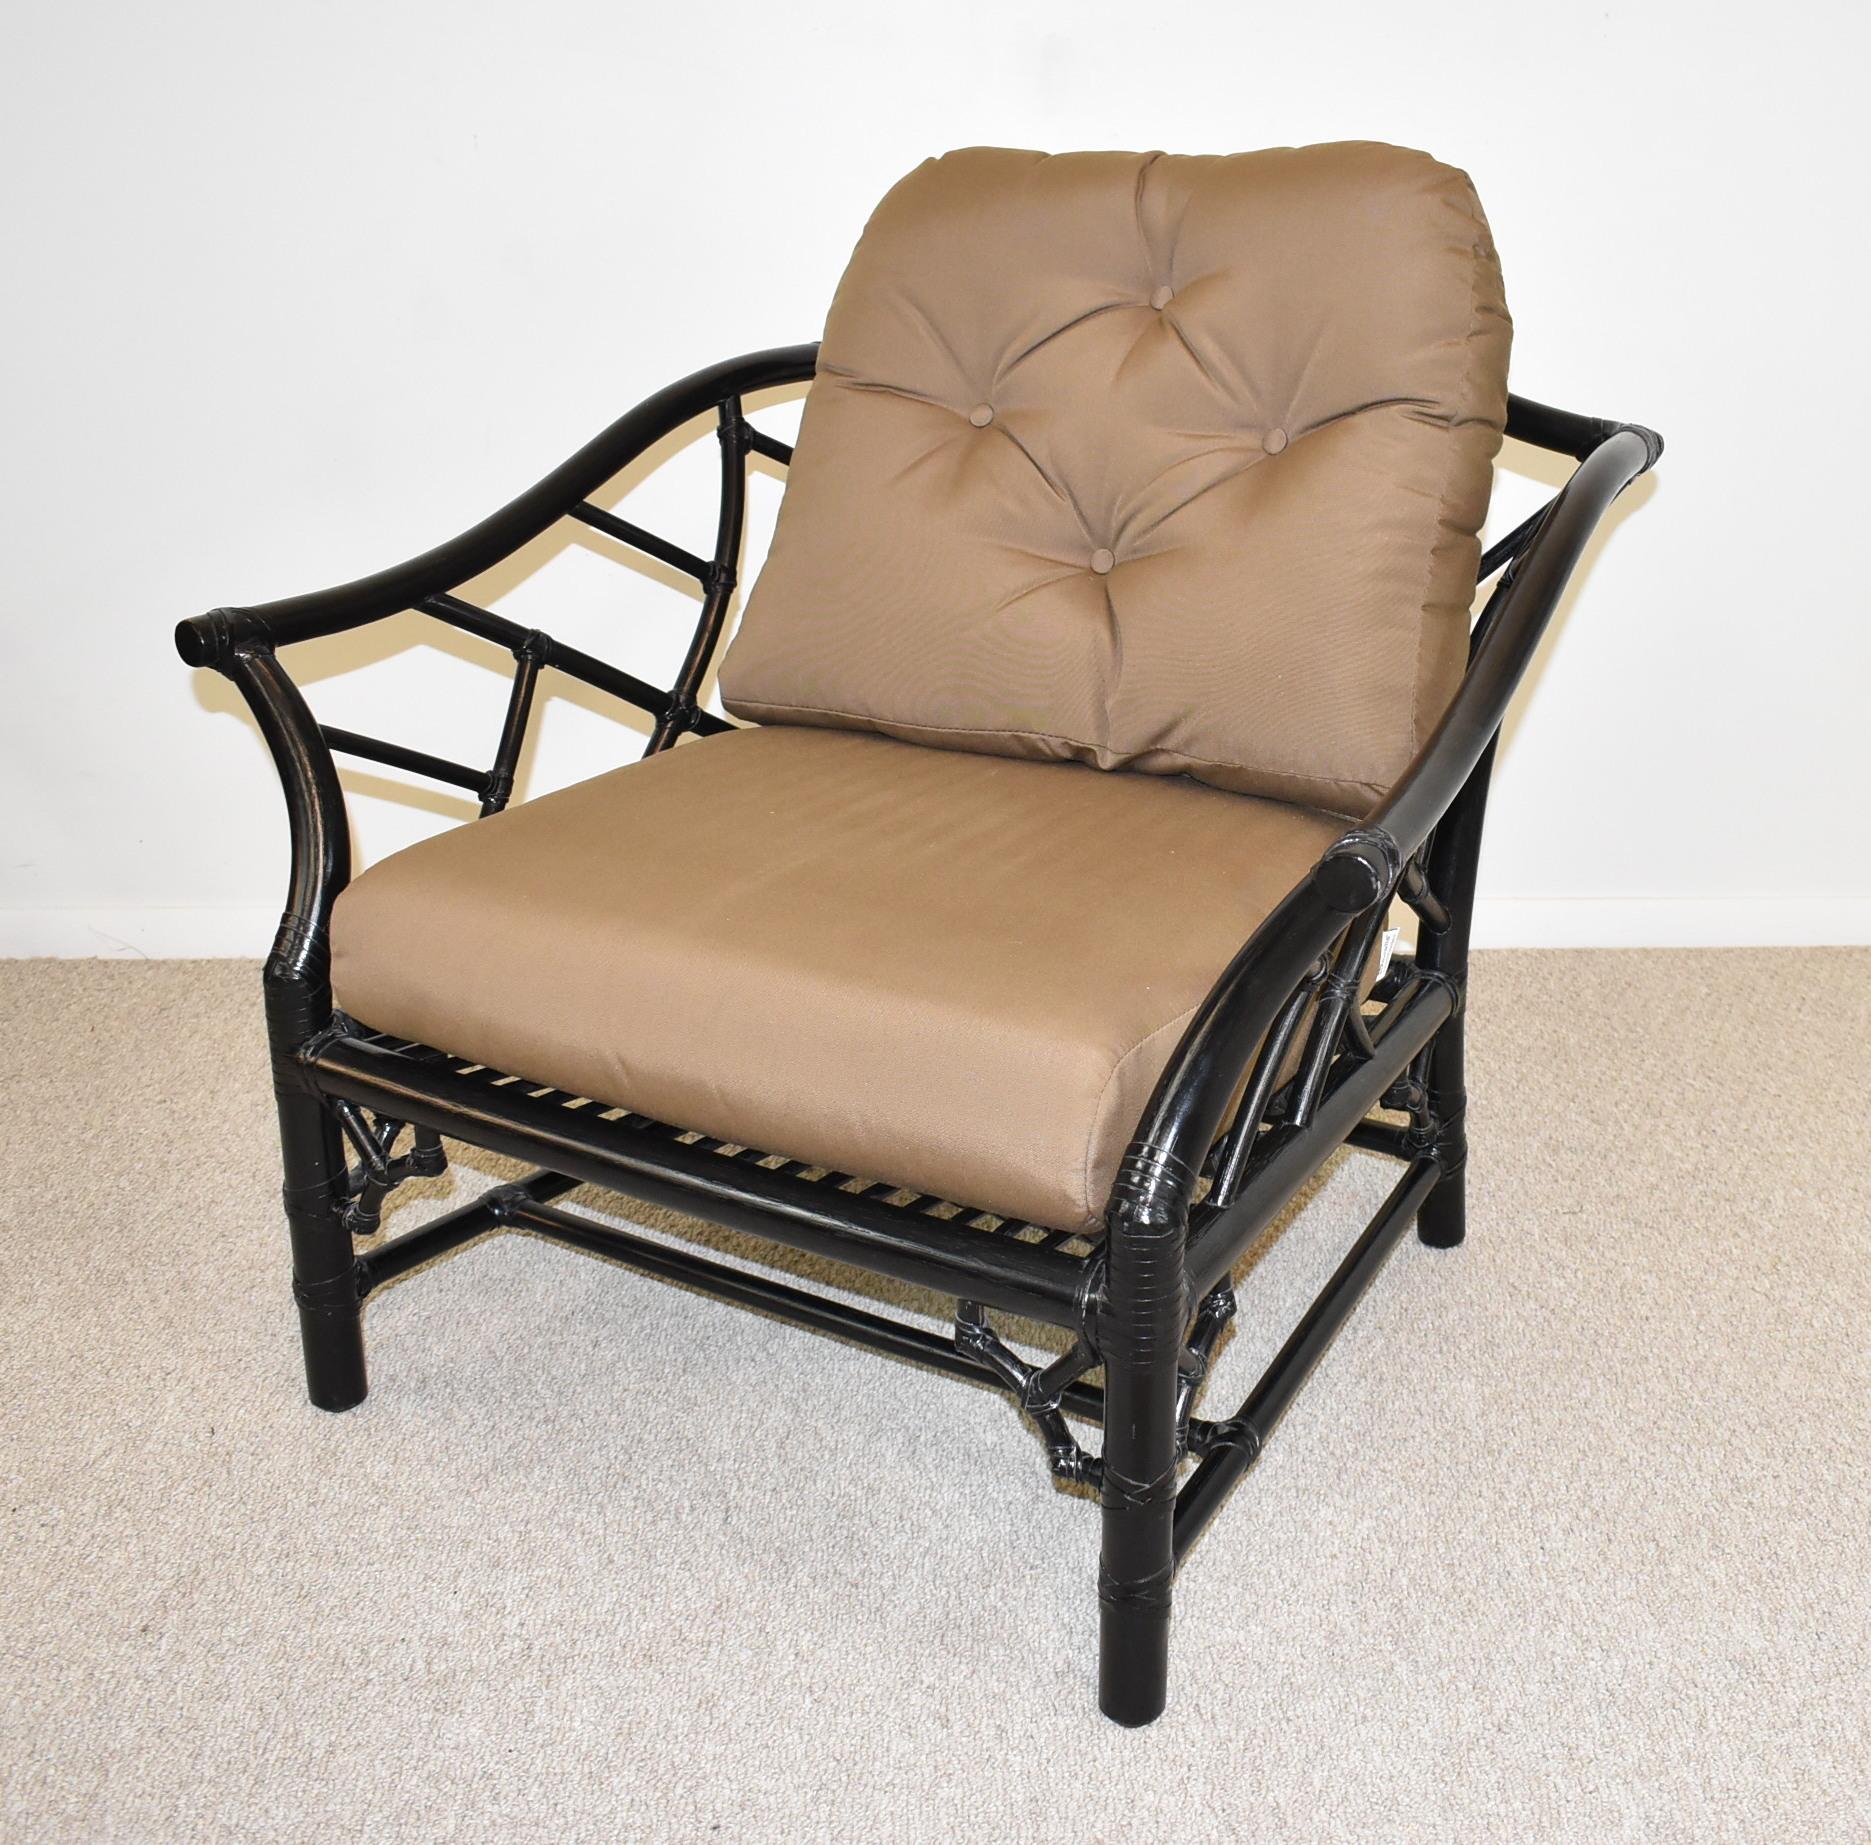 Pair of McGuire Rattan chairs in black, occasional chair's factory black paint, maker's mark, solid construction, very good condition. Dimensions: frame 35